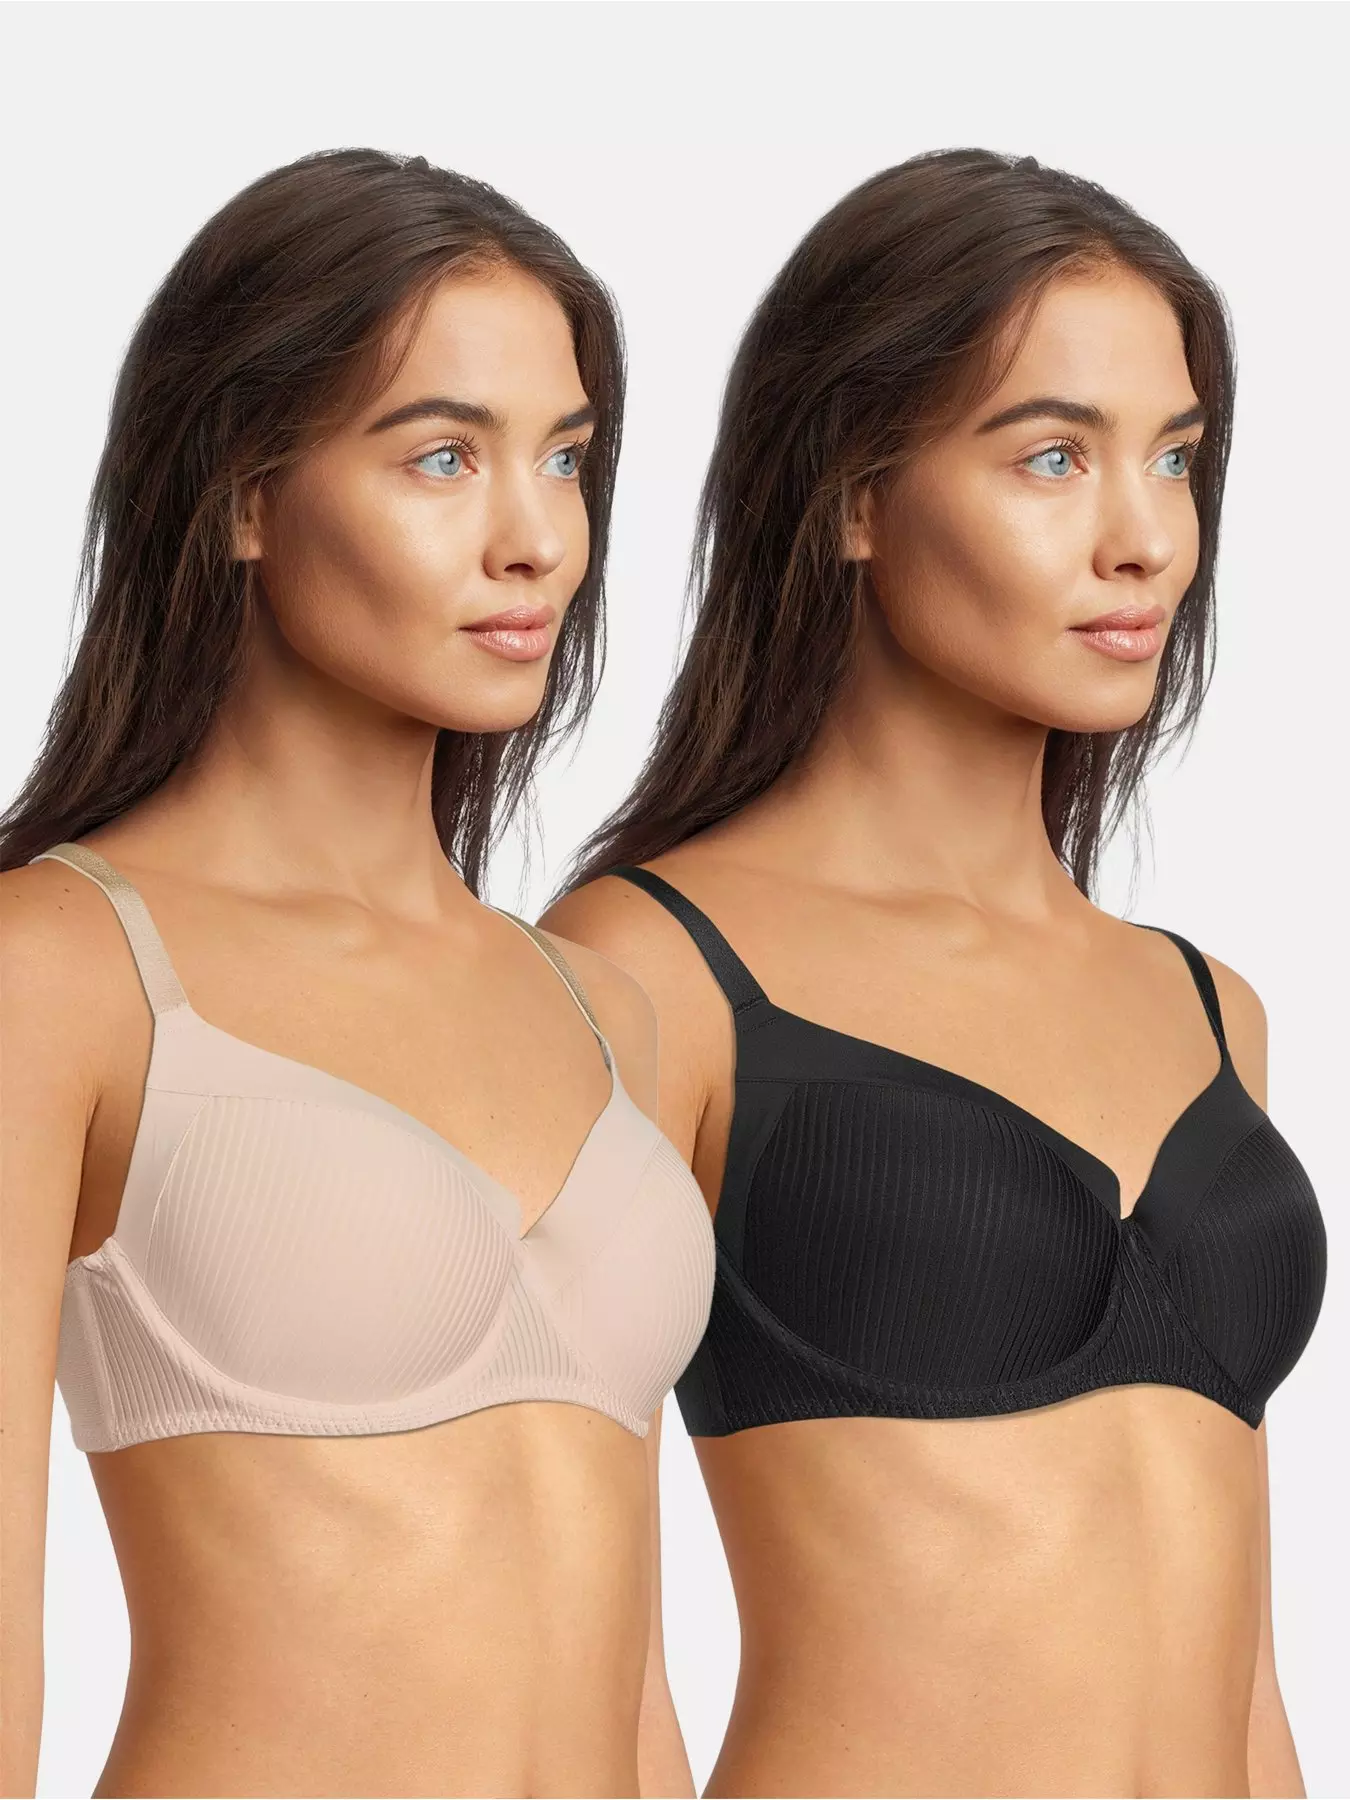 Hfyihgf On Clearance Women's Full-Coverage Bras Pure Soft Comfort